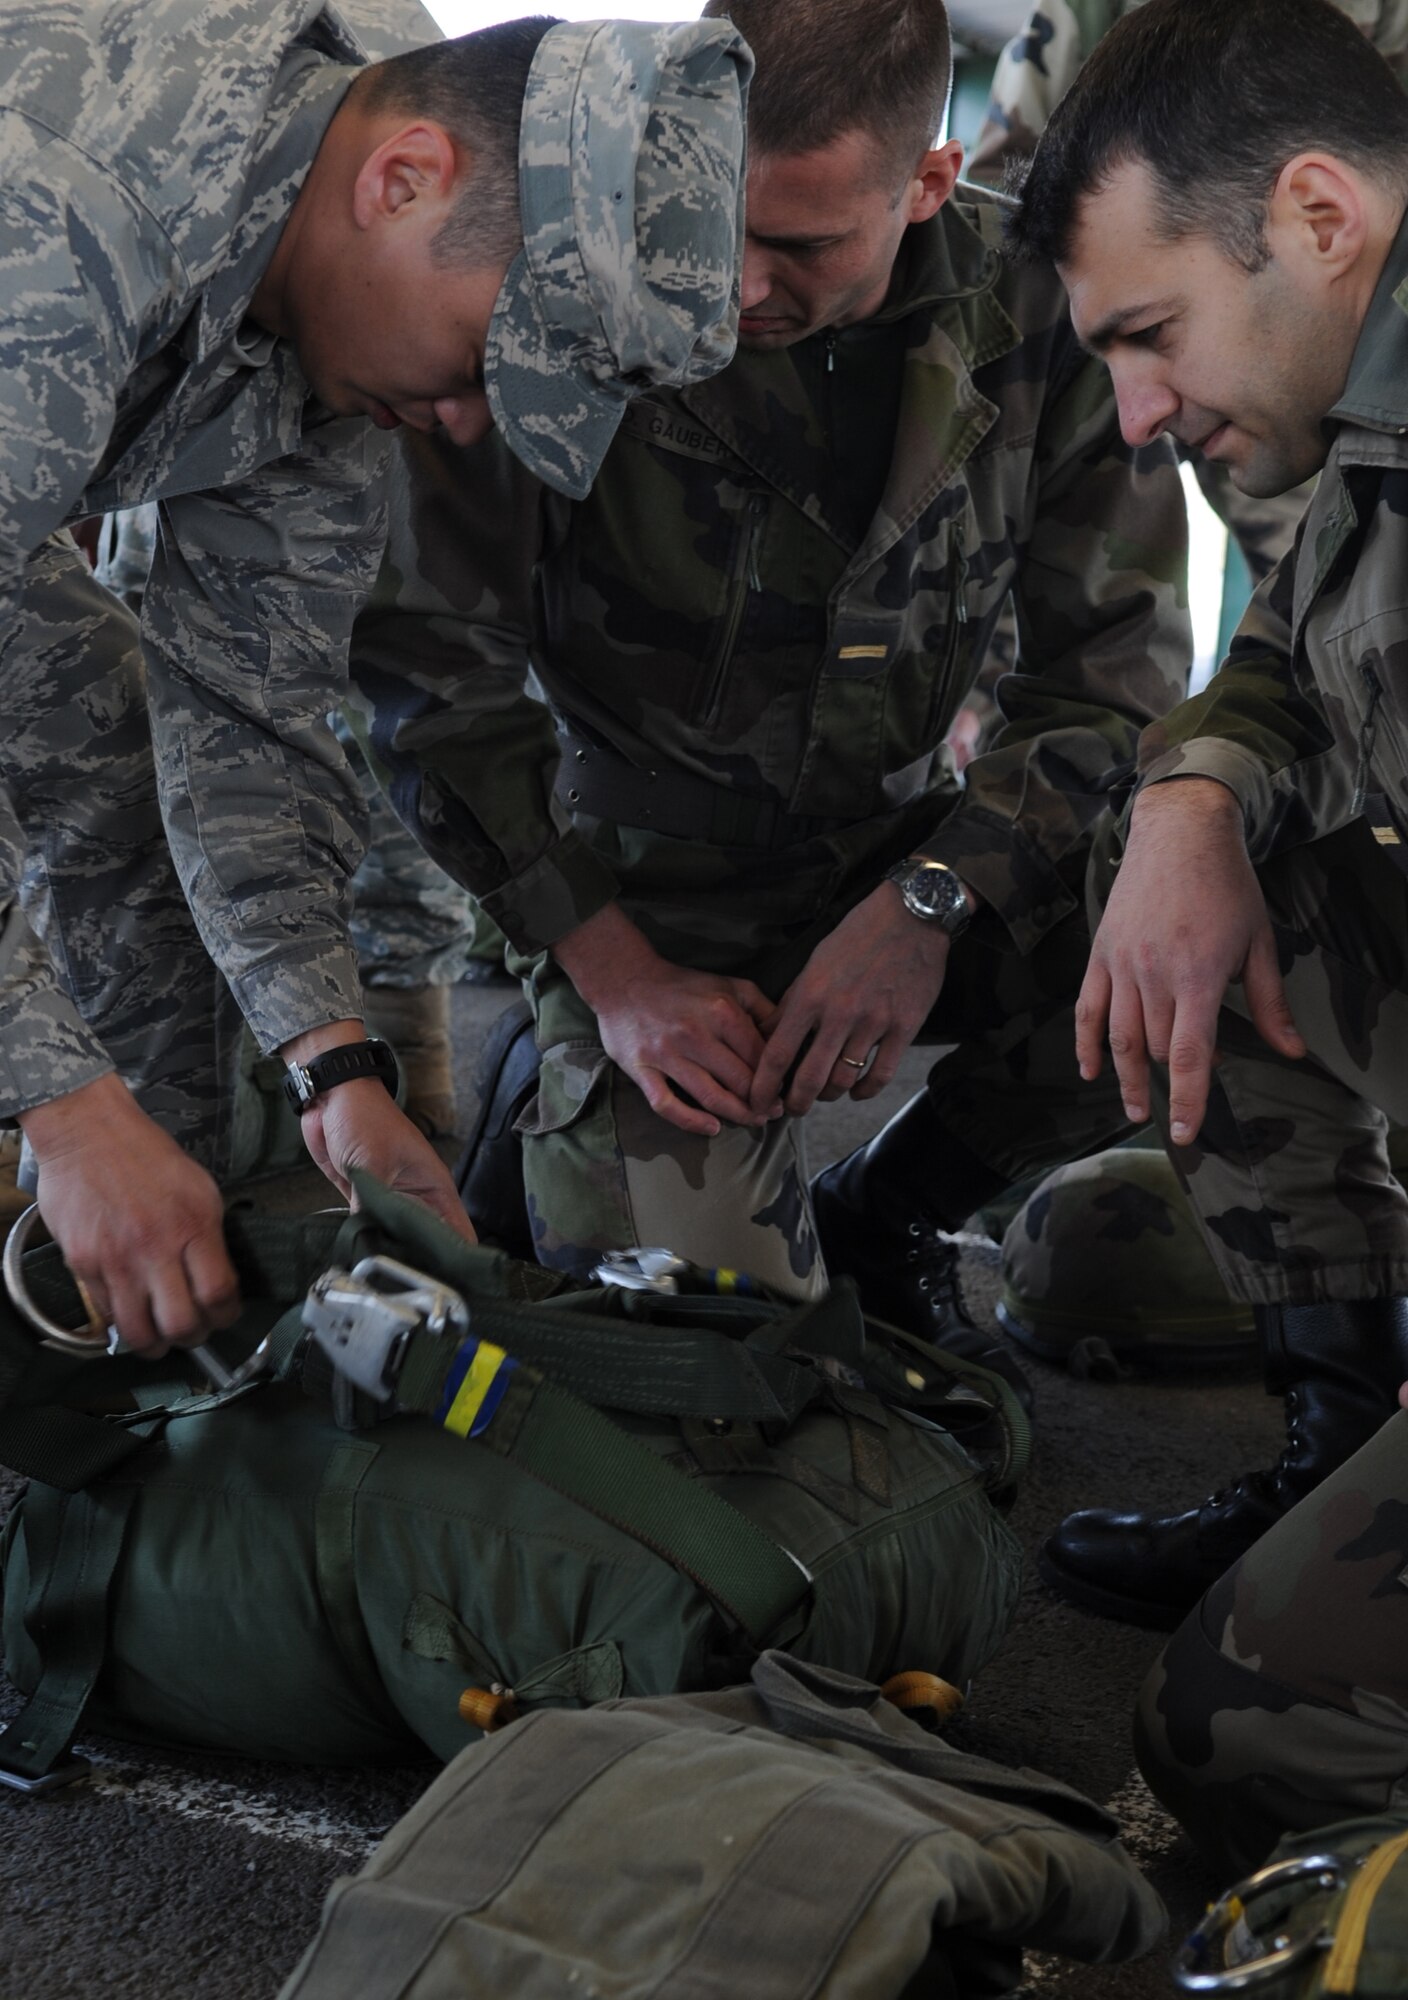 U.S. Air Force Capt. Walter Grey, 435th Air Mobility Squadron airfield operations and flight officer, helps French Airborne members ready their chute prior to a static jump from a C-130J Super Hercules at École des troupes aéroportées (ETAP) Pau, France, March 1, 2010. Members of the 435th Contingency Response Group and the 5th Quartermaster Company joined with their French military counterparts for a week of training at the École des troupes aéroportées (ETAP), or School of Airborne Troops, a military school dedicated to training the military paratroopers  the French army, located in the town of Pau, in the département of Pyrénées-Atlantiques, France. The ETAP is responsible for training paratroopers, and for international cooperation and promotion of paratroop culture. (U.S. Air Force photo by Airman 1st Class Caleb Pierce)